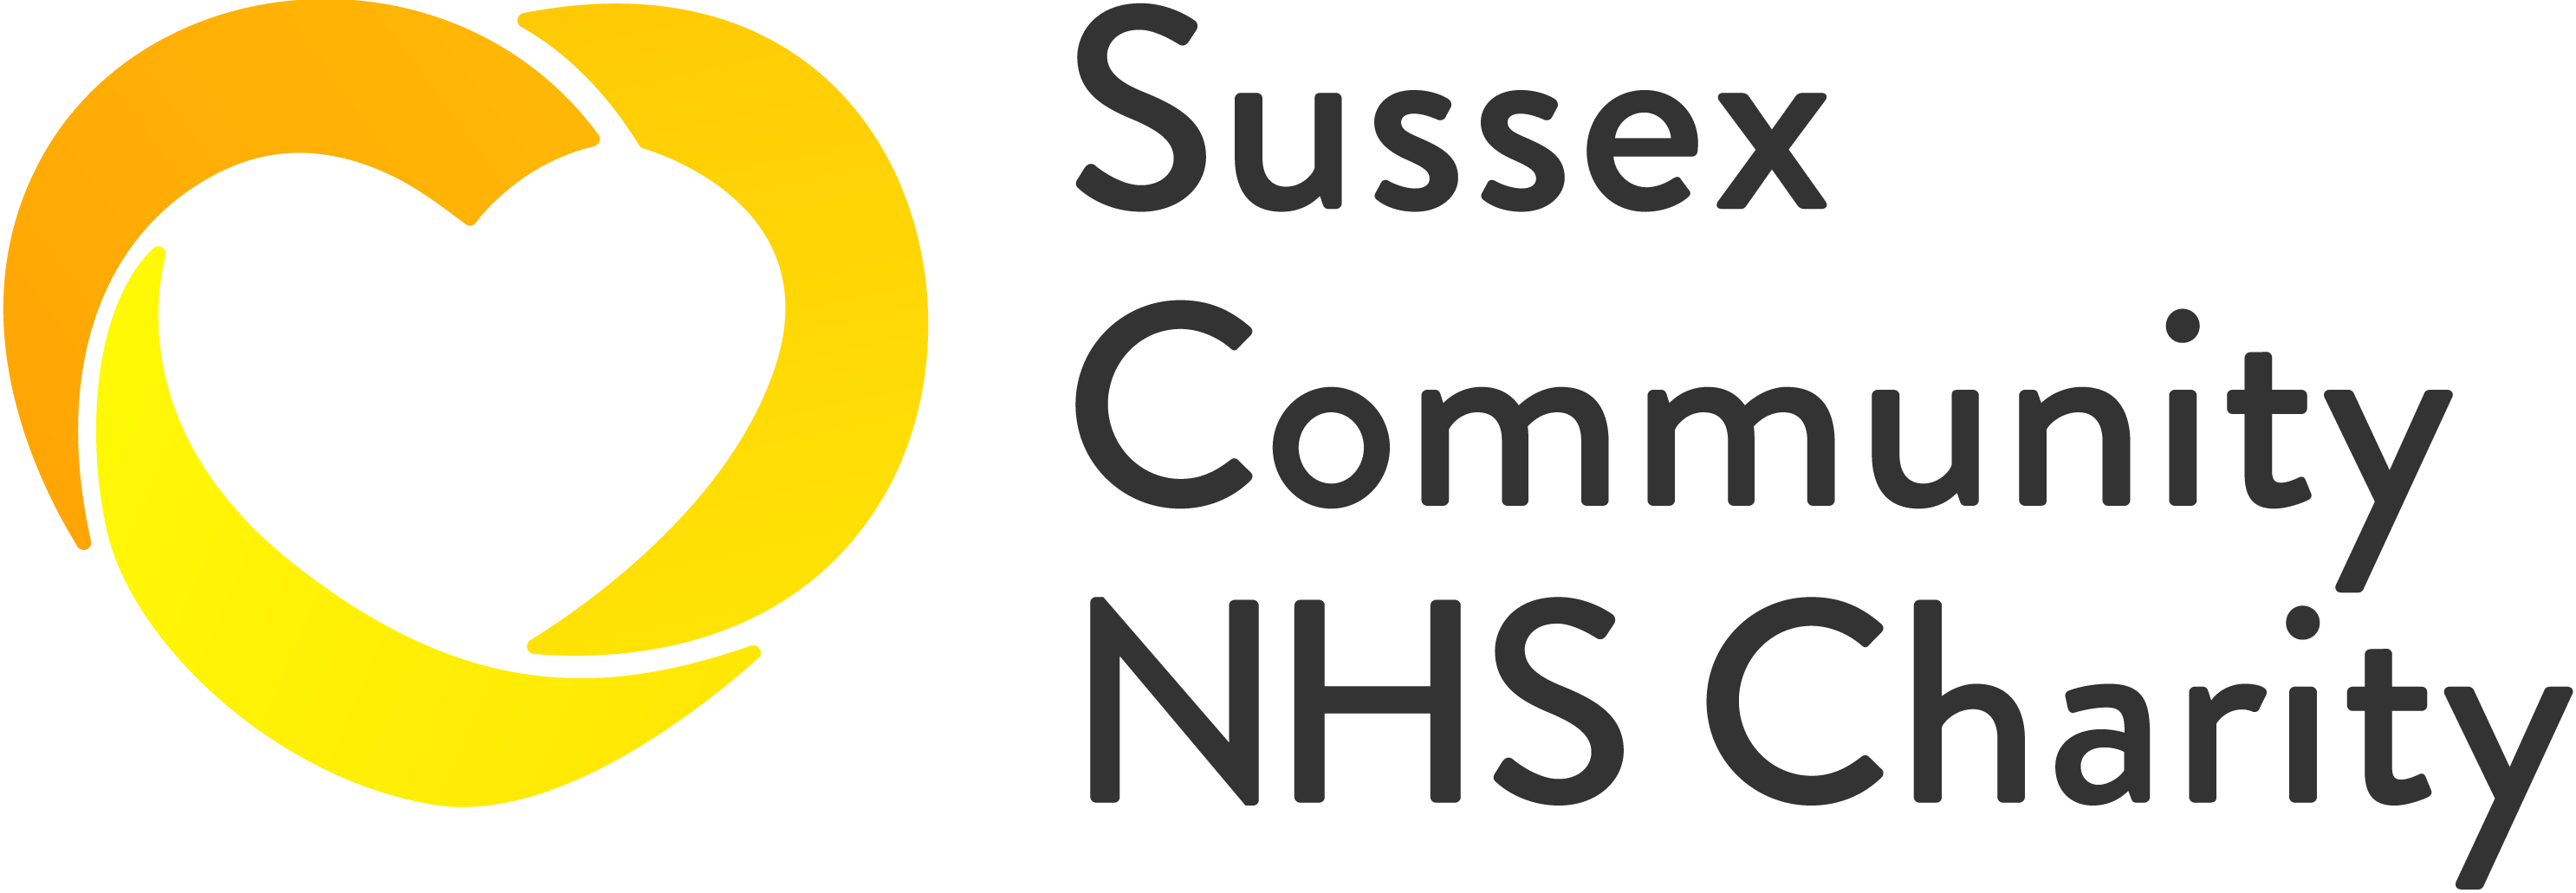 Sussex Community NHS Charity